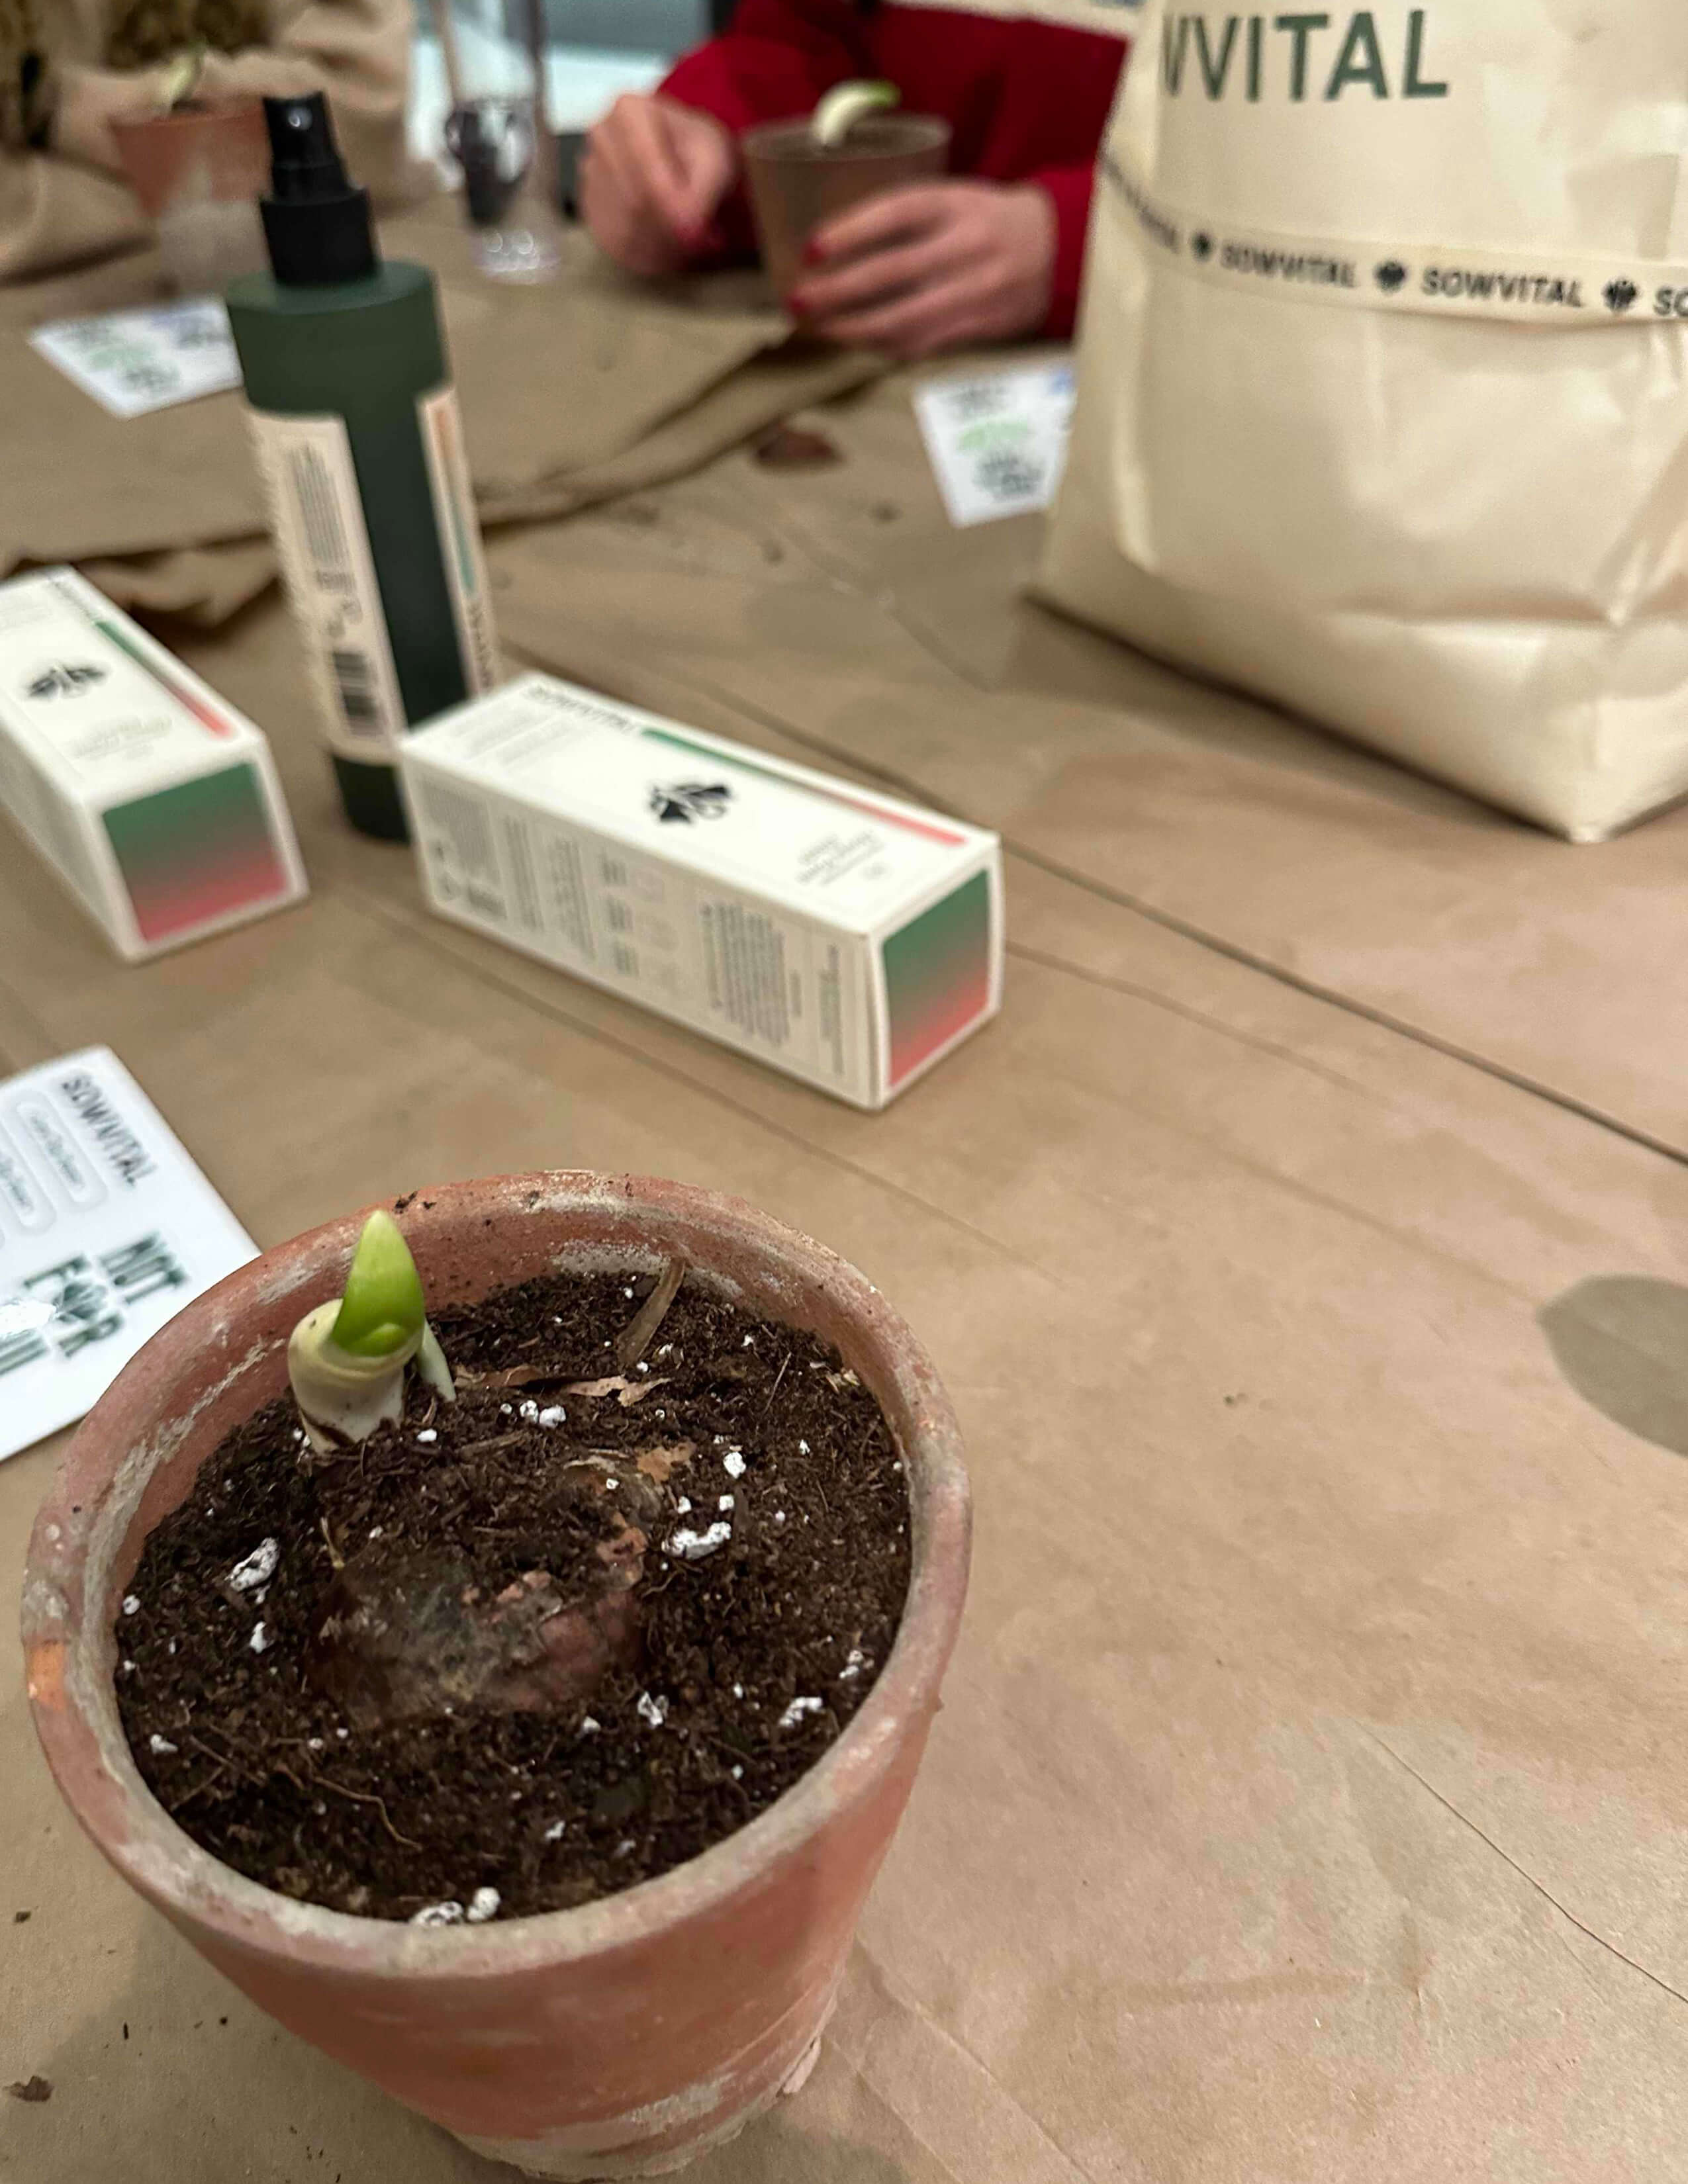 A potted bulb is in the terracotta pot while Sowvital’s product packaging lying on the wooden table.